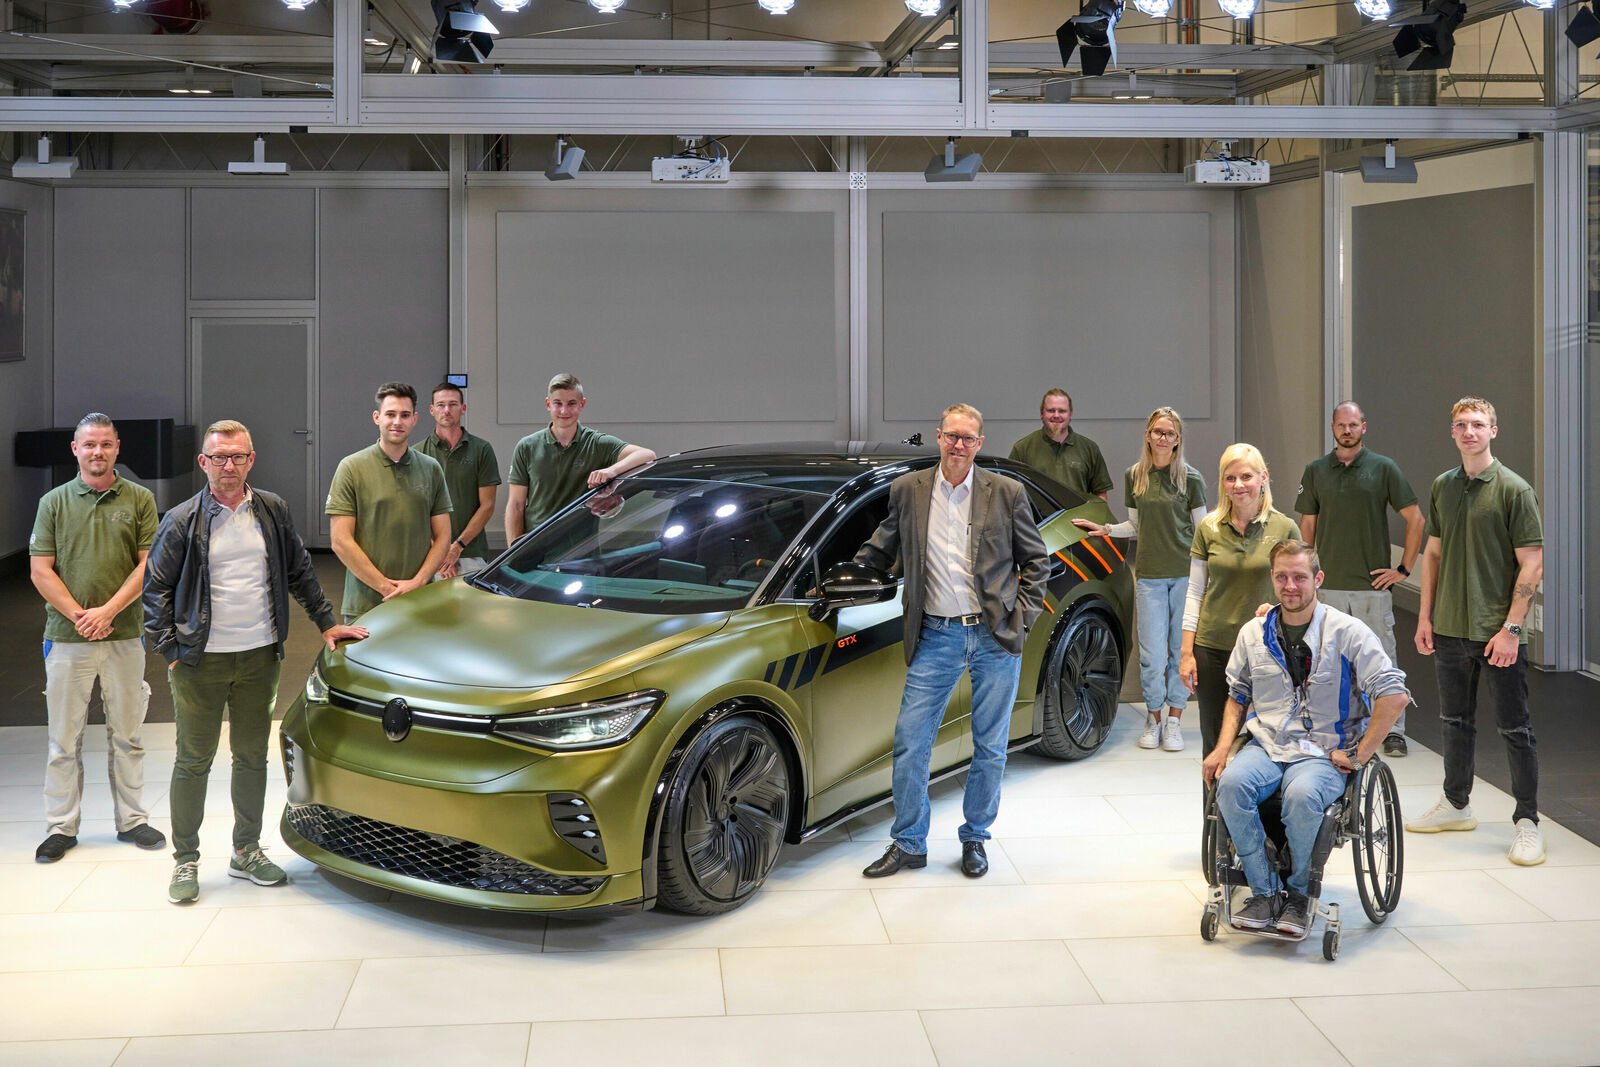 Premiere at the ID. Meet: apprentices from Volkswagen Sachsen present ID.5 GTX “Xcite” show car